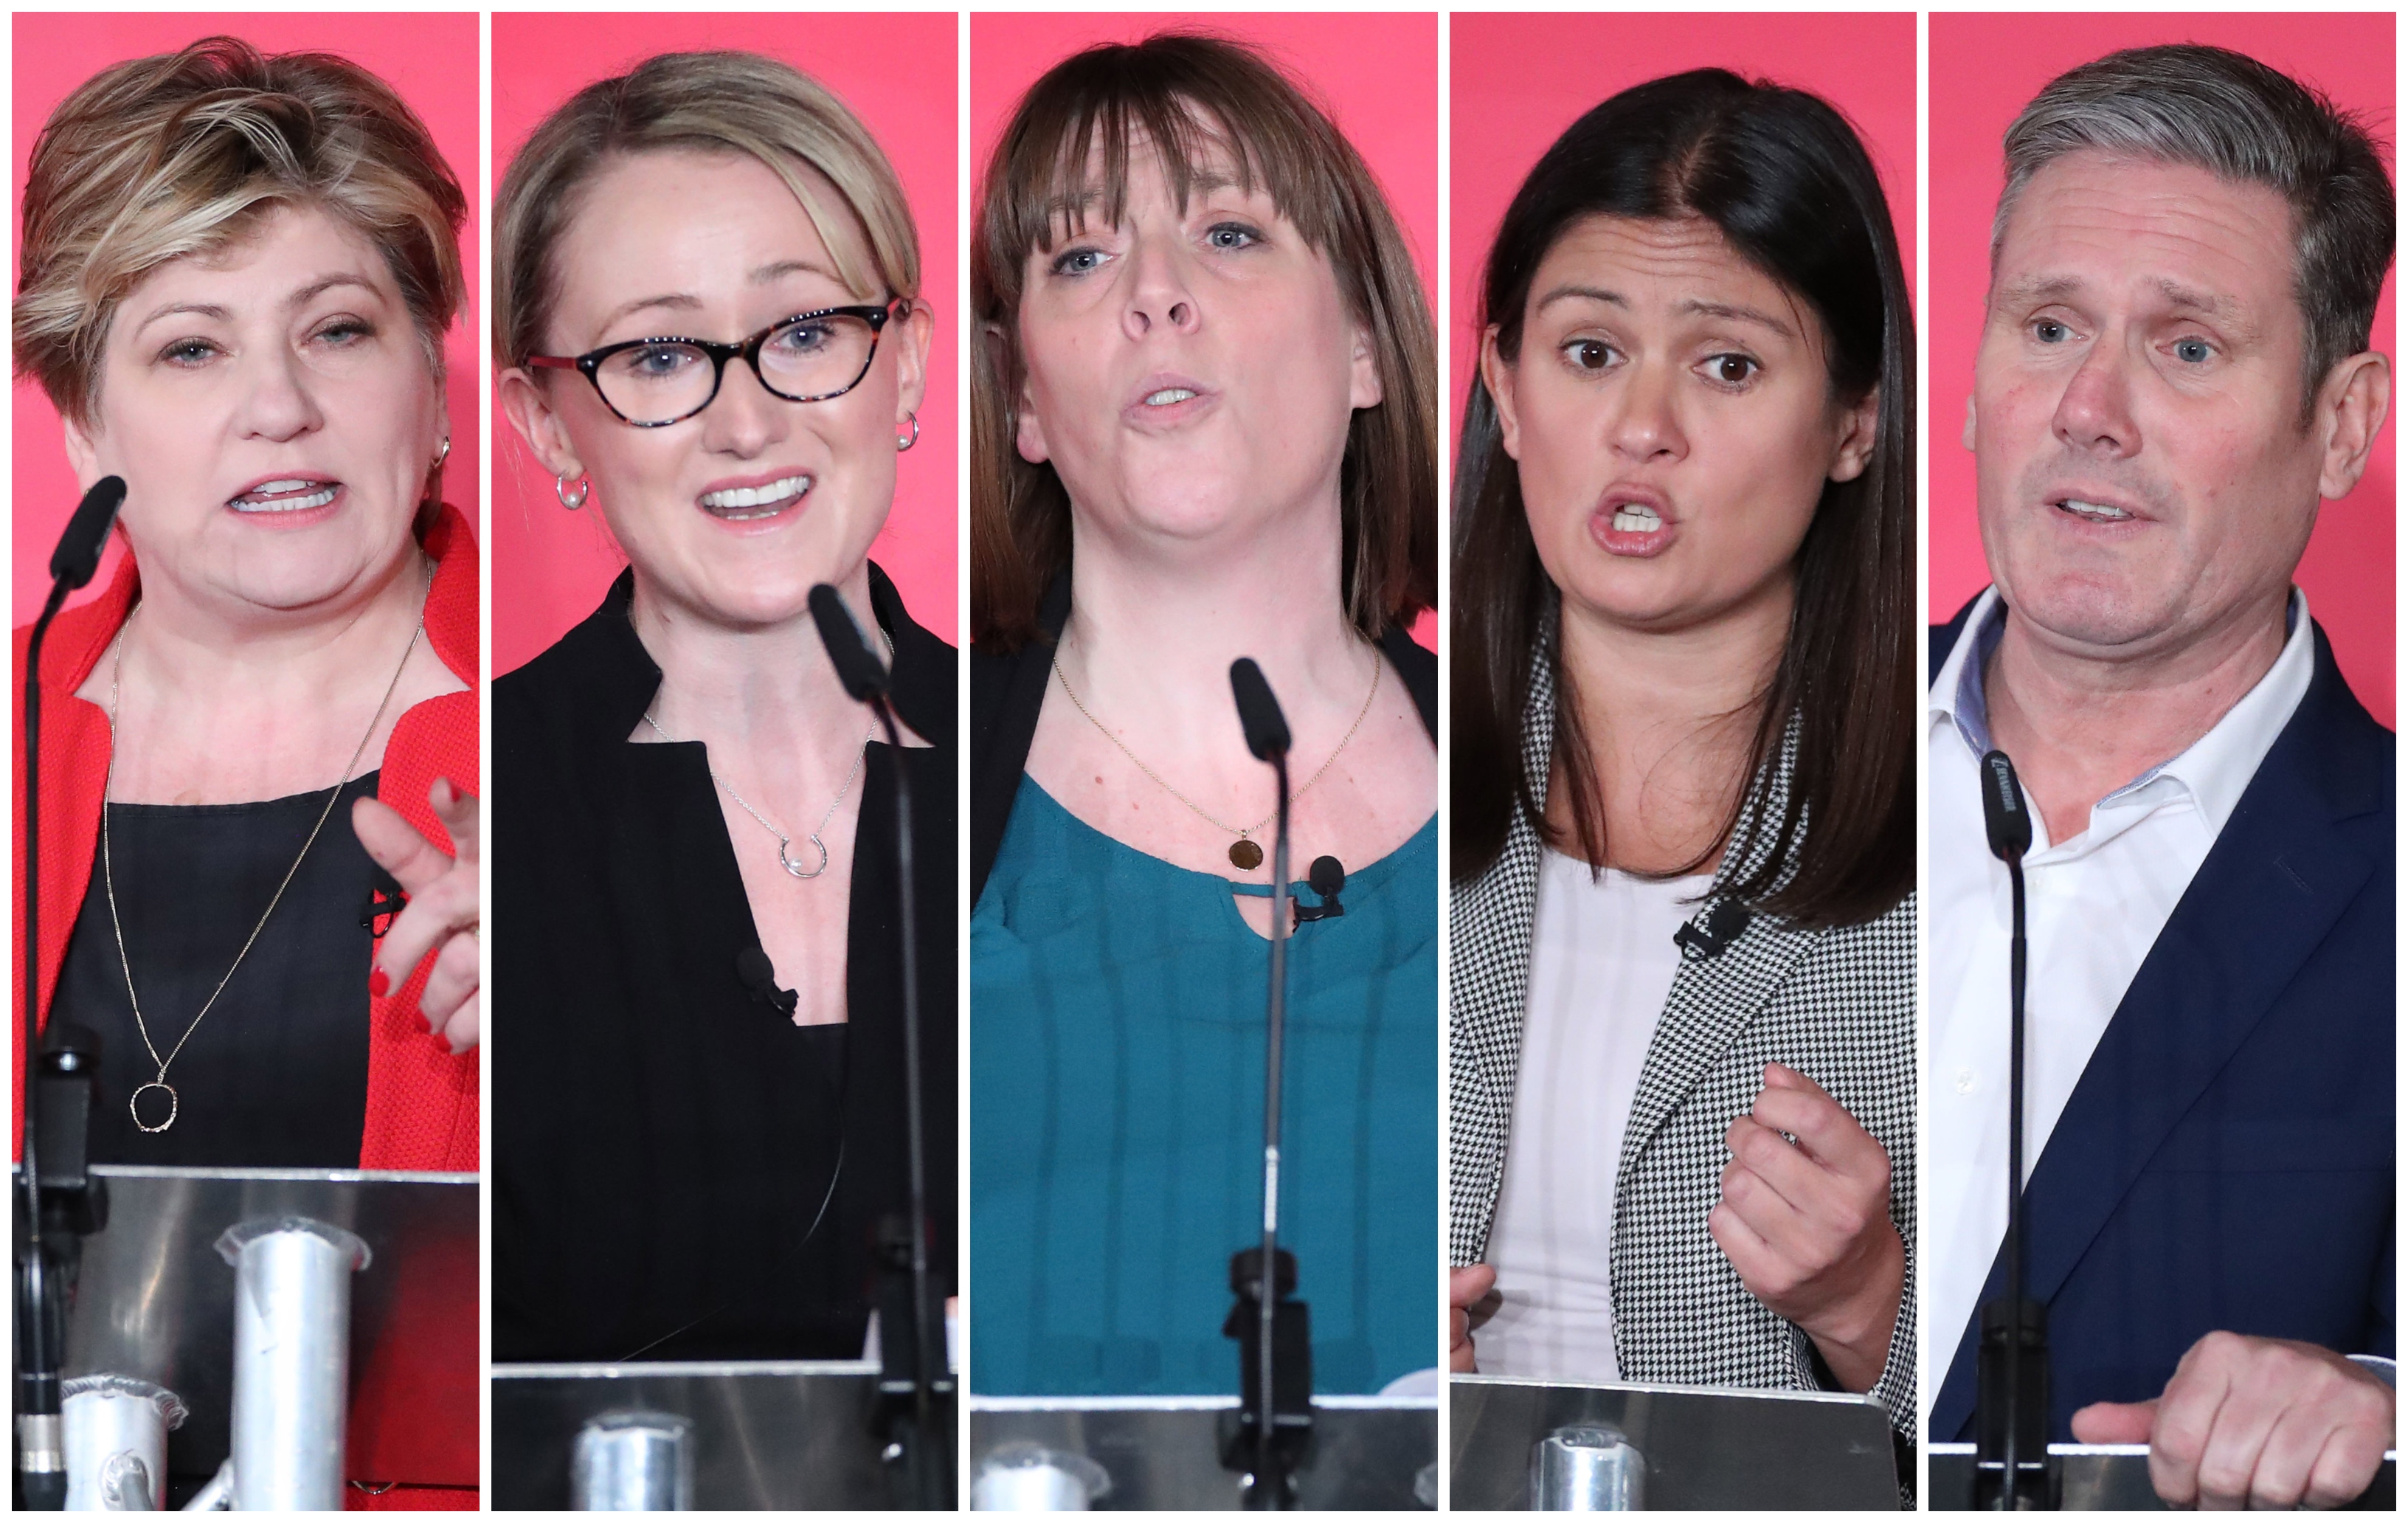 Labour leadership candidates are, from left: Emily Thornberry, Rebecca Long-Bailey, Jess Phillips, Lisa Nandy, and Keir Starmer